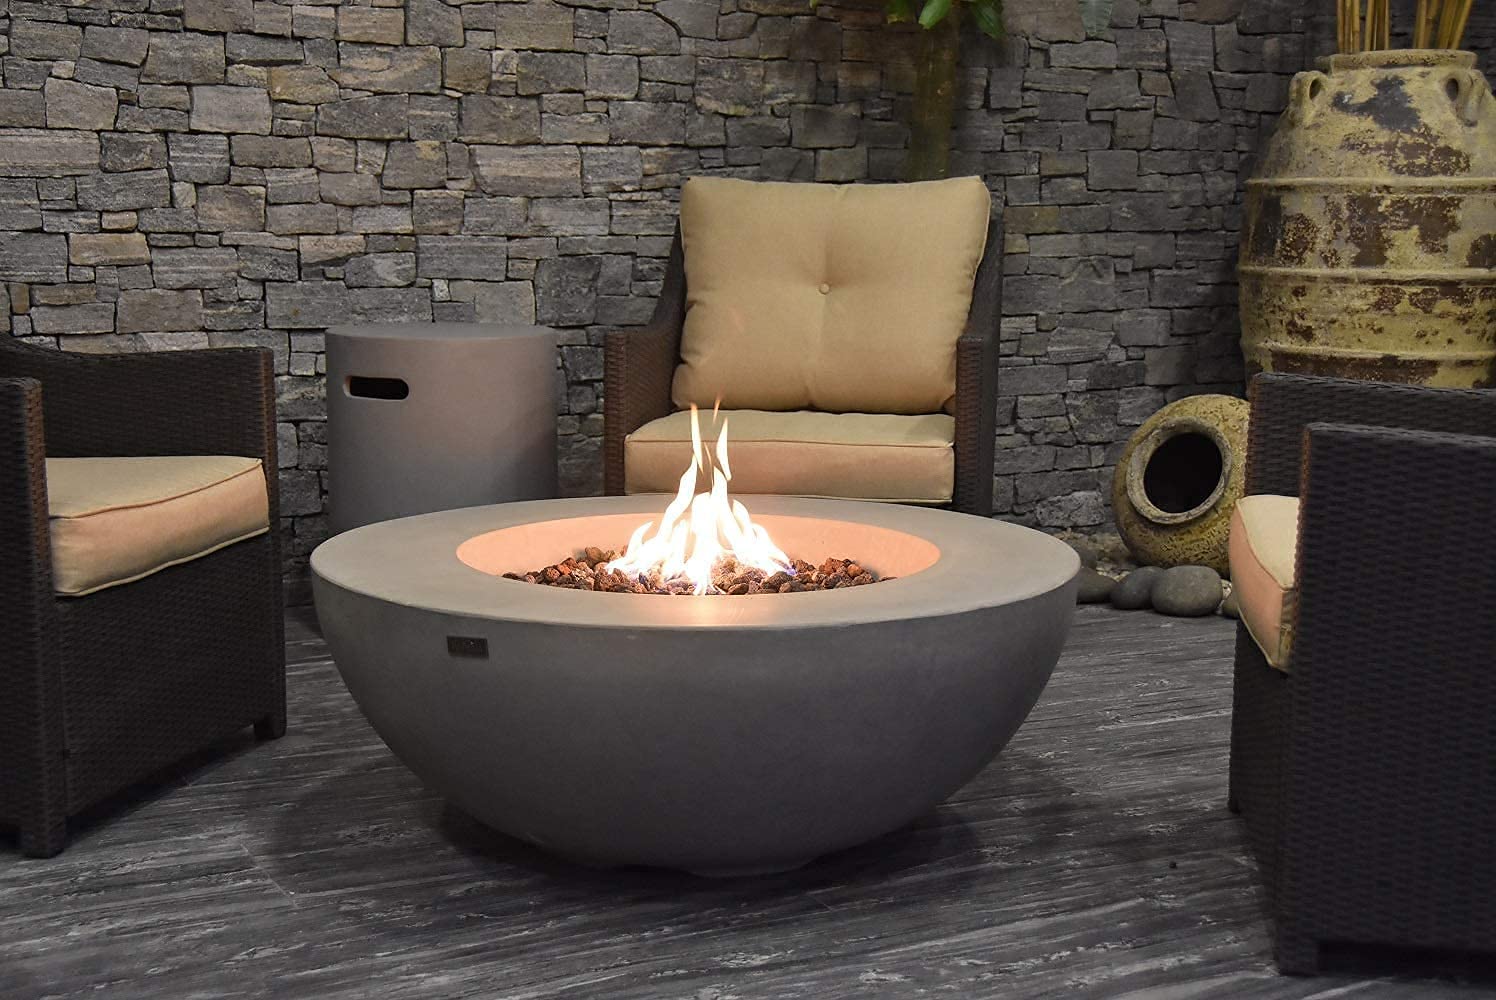 Elementi Fire Pit Outdoor Natural Gas Fireplace Patio Fire Bowl 45,000BTU Output, Round Fire Table with 13.2lbs Lava Rocks,Tank Cover for Fire Bowl Available, Lunar Bowl Series (Grey)